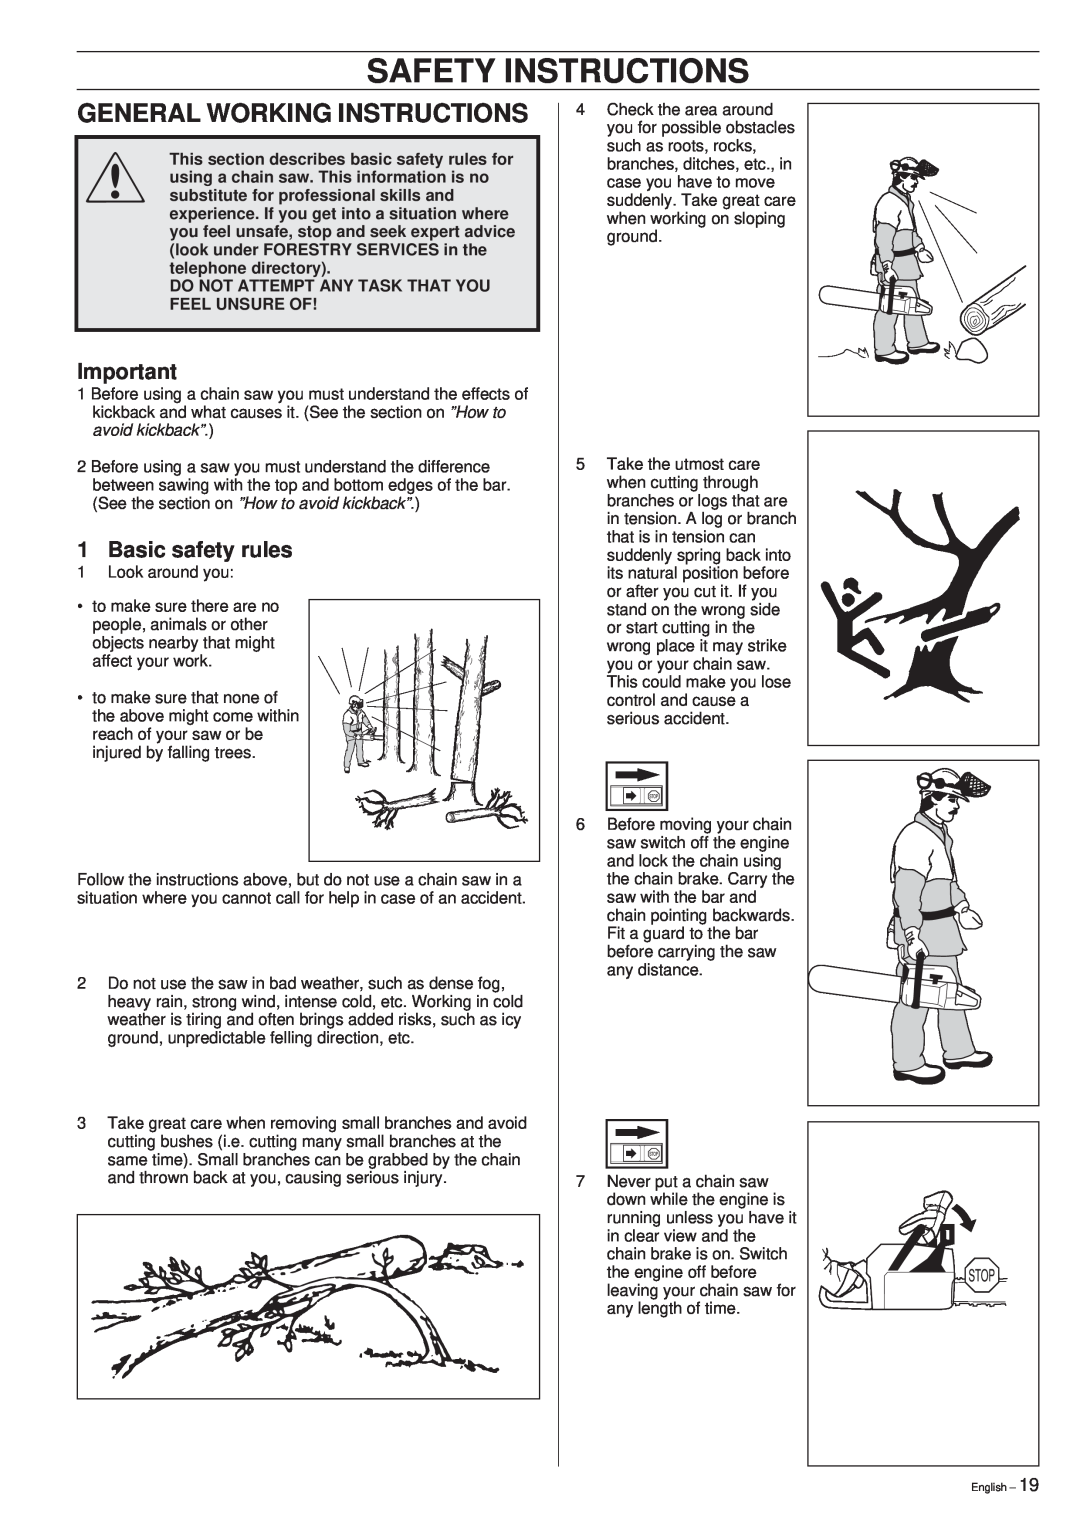 Husqvarna 40 manual General Working Instructions, Basic safety rules, Safety Instructions 